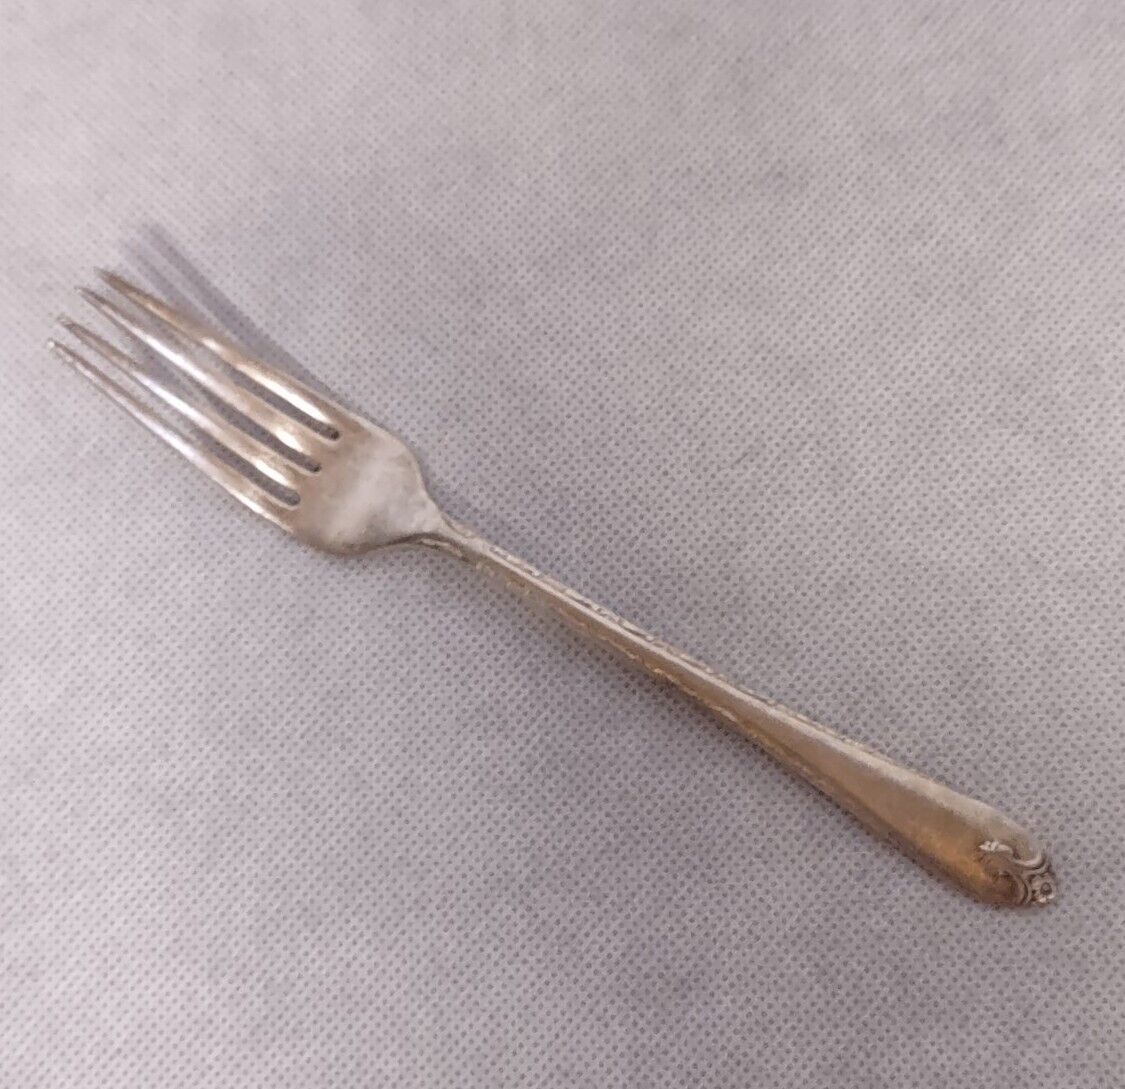 Primary image for International Silver Exquisite Dinner Fork 7.5" Silverplated 1940